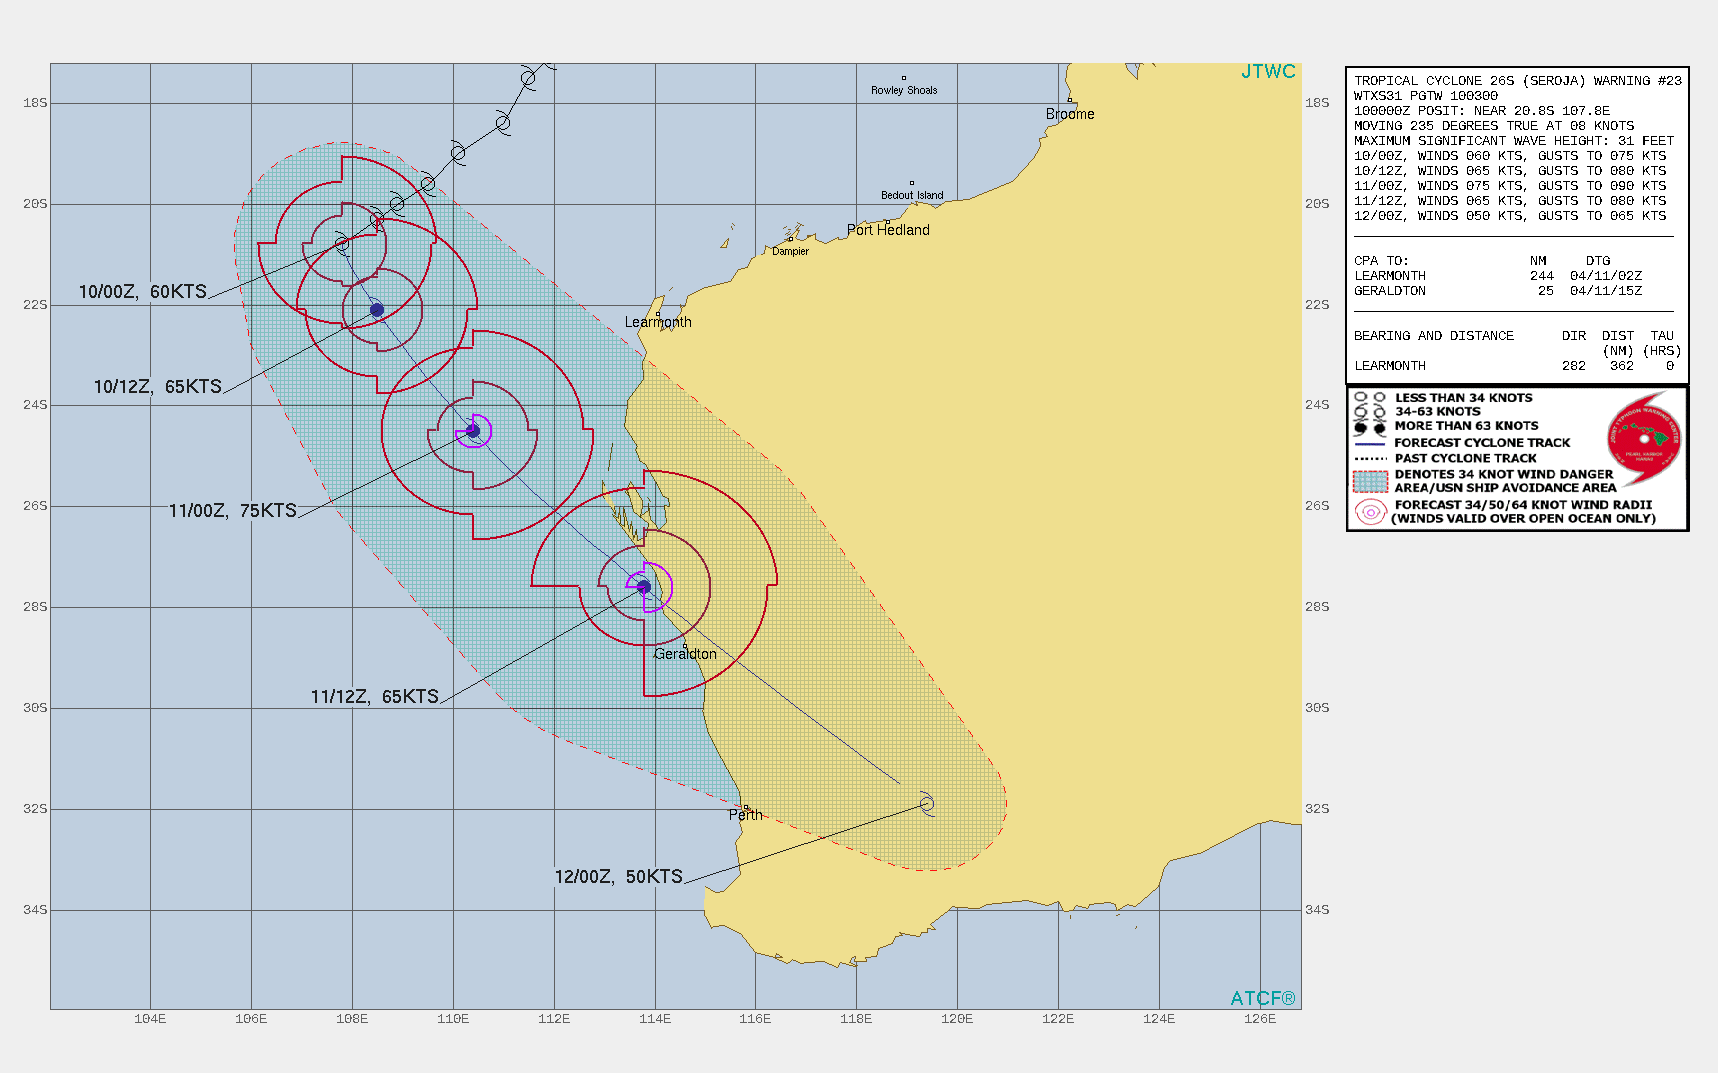 26S(SEROJA). WARNING 23 ISSSUED AT 10/03UTC.ENVIRONMENTAL ANALYSIS INDICATES FAVORABLE CONDITIONS  WITH LOW VERTICAL WIND SHEAR (VWS), ROBUST POLEWARD OUTFLOW INTO THE  WESTERLIES AND WARM SST (28C) VALUES. THE INITIAL INTENSITY IS  ASSESSED AT 60 KNOTS BASED ON AN AVERAGE OF DVORAK INTENSITY  ESTIMATES FROM PGTW, KNES AND APRF RANGING FROM T3.5-4.0 (55-65  KNOTS). TC 26S IS EXPECTED TO RECURVE BY 12H AND ACCELERATE SOUTH- SOUTHEASTWARD WITH EXTRA-TROPICAL TRANSITION (ETT) COMMENCING AT 24H WHEN THE SYSTEM BEGINS TO INTERACT WITH THE BAROCLINIC ZONE AND  WESTERLIES. AFTER 24H, TC 26S WILL TURN SOUTHEASTWARD TOWARD  SOUTHWEST AUSTRALIA, TRACKING WITHIN THE MIDLATITUDE WESTERLIES. THE  SYSTEM WILL COMPLETE ETT BY 48H AS IT BECOMES EMBEDDED WITHIN THE  WESTERLIES AND GAINS FRONTAL CHARACTERISTICS. TC 26S WILL WEAKEN BY  36H AS IT ENCOUNTERS STRONG VWS AND INTERACTS WITH LAND. RAPID  WEAKENING IS ANTICIPATED AFTER 36H AS VWS INCREASES TO 25-35  KNOTS.